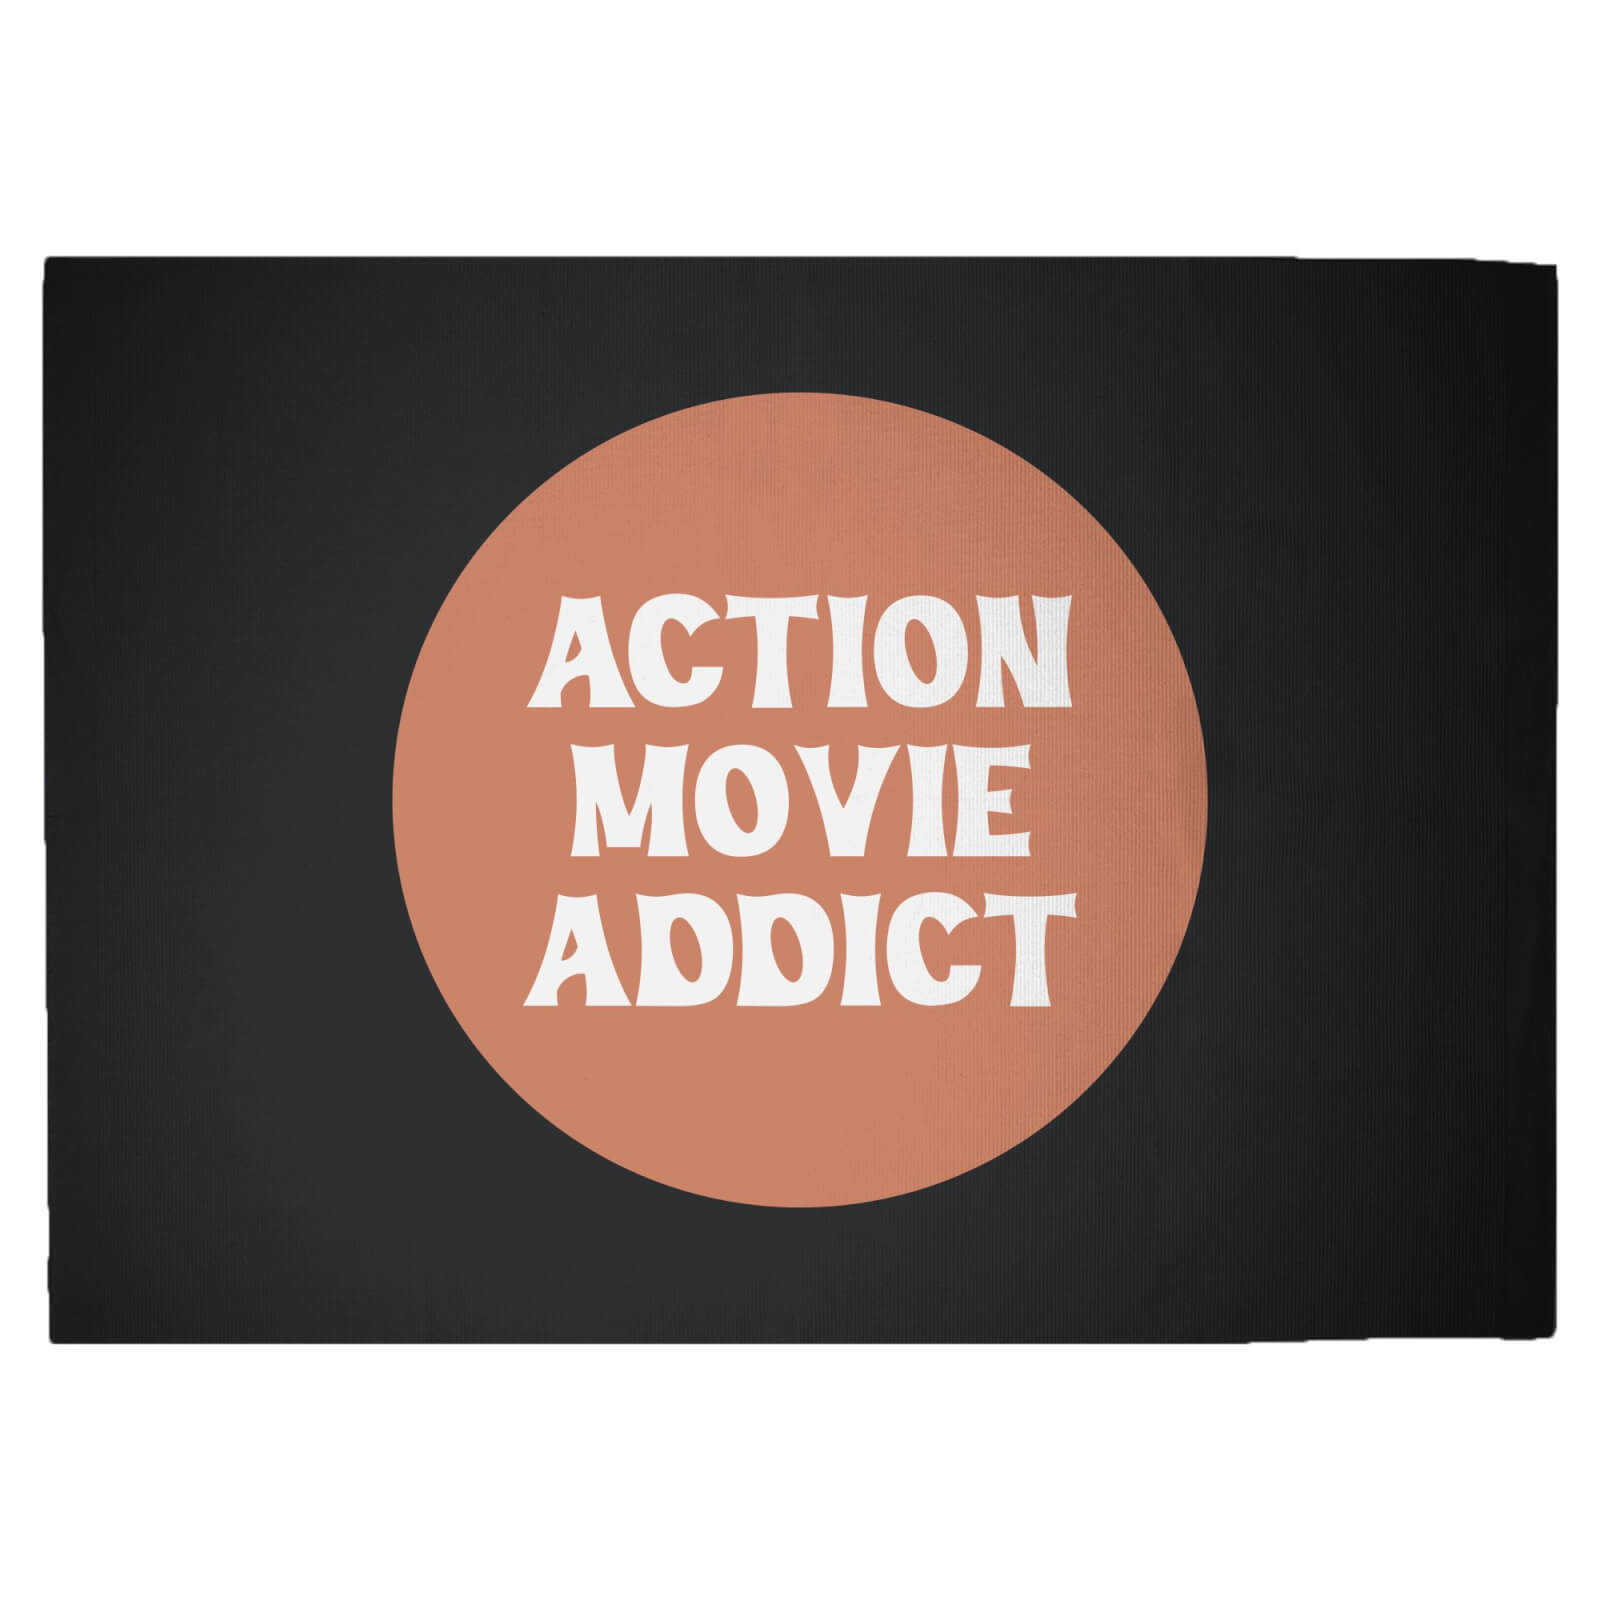 Action Movie Addict Woven Rug - Large